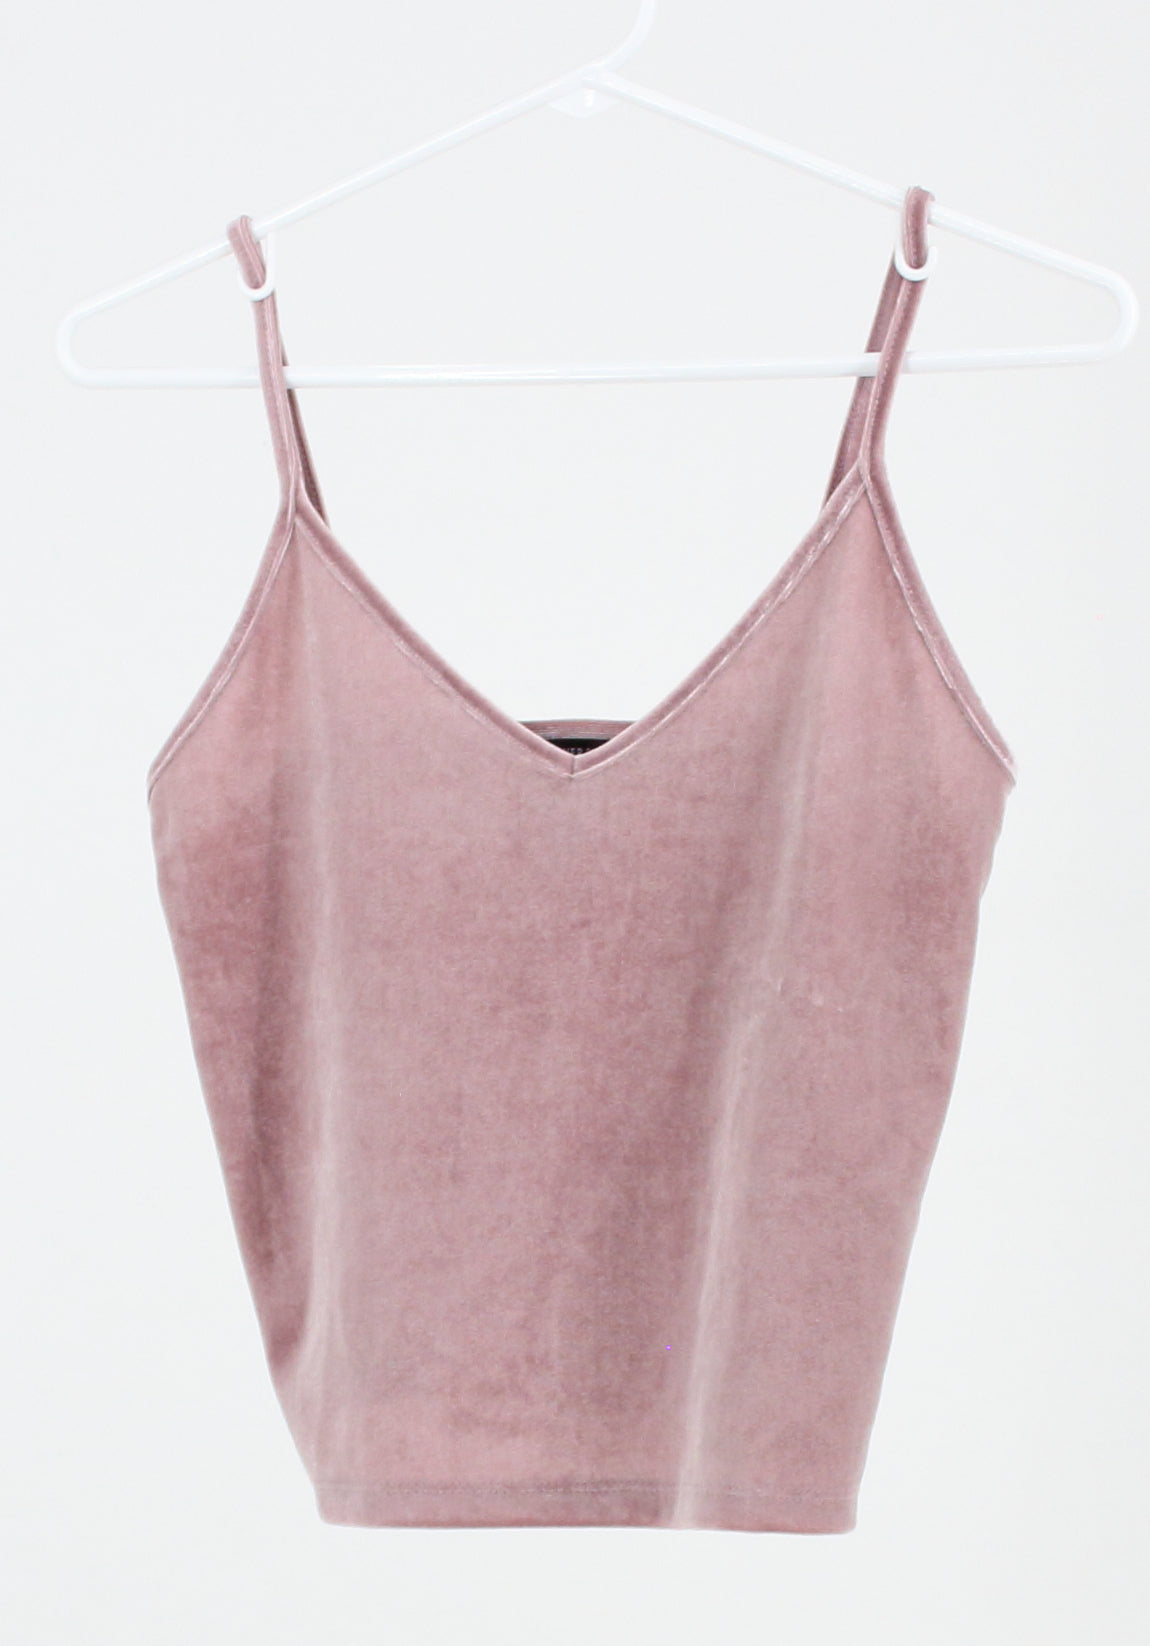 Forever 21 satin pink cropped tank top